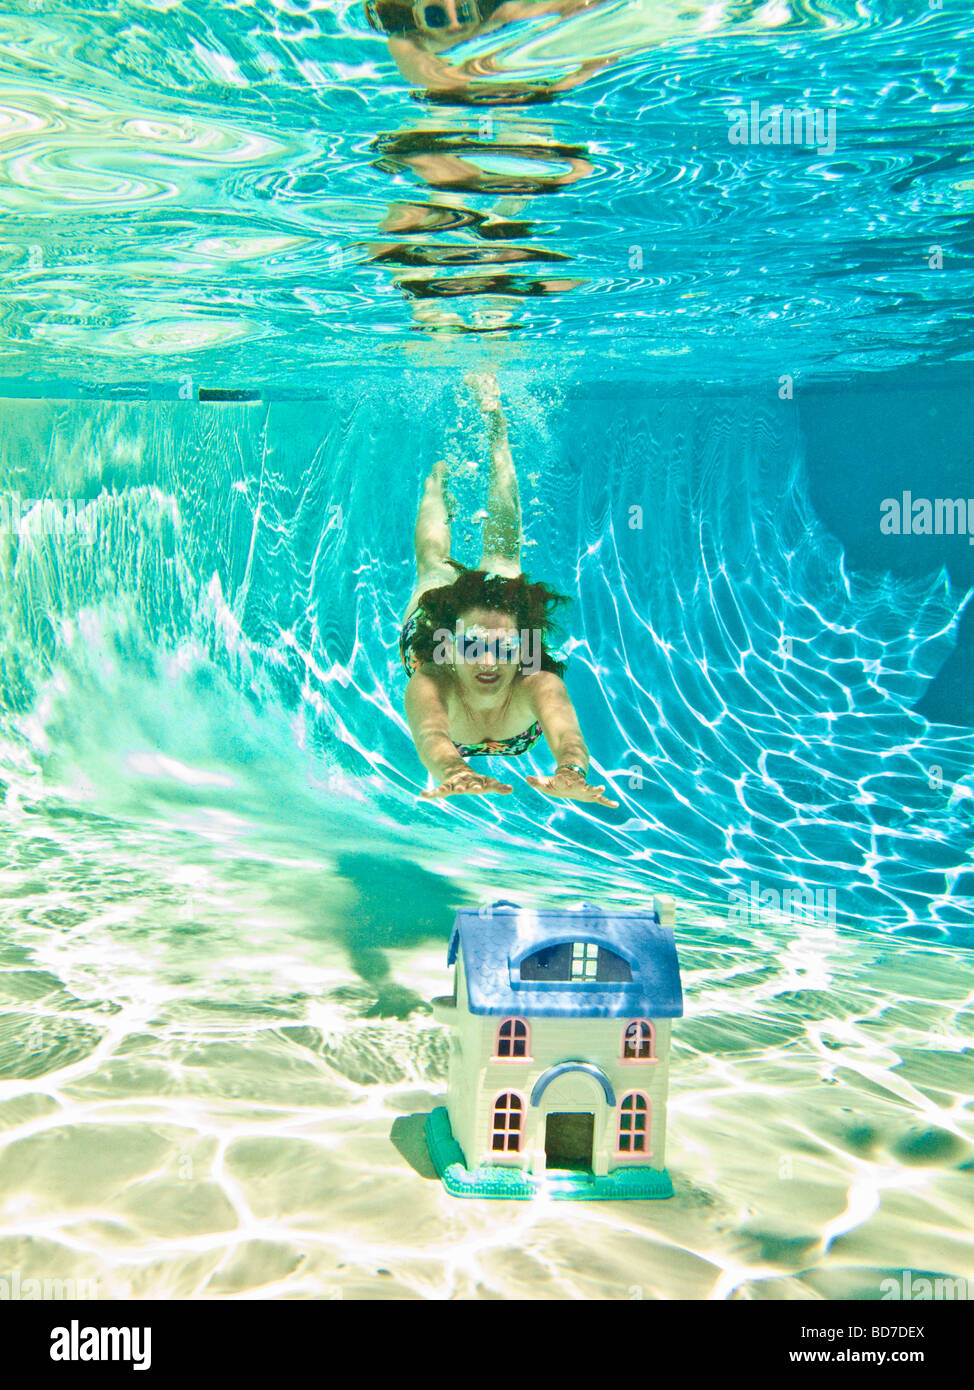 Woman diving after sinking house Stock Photo